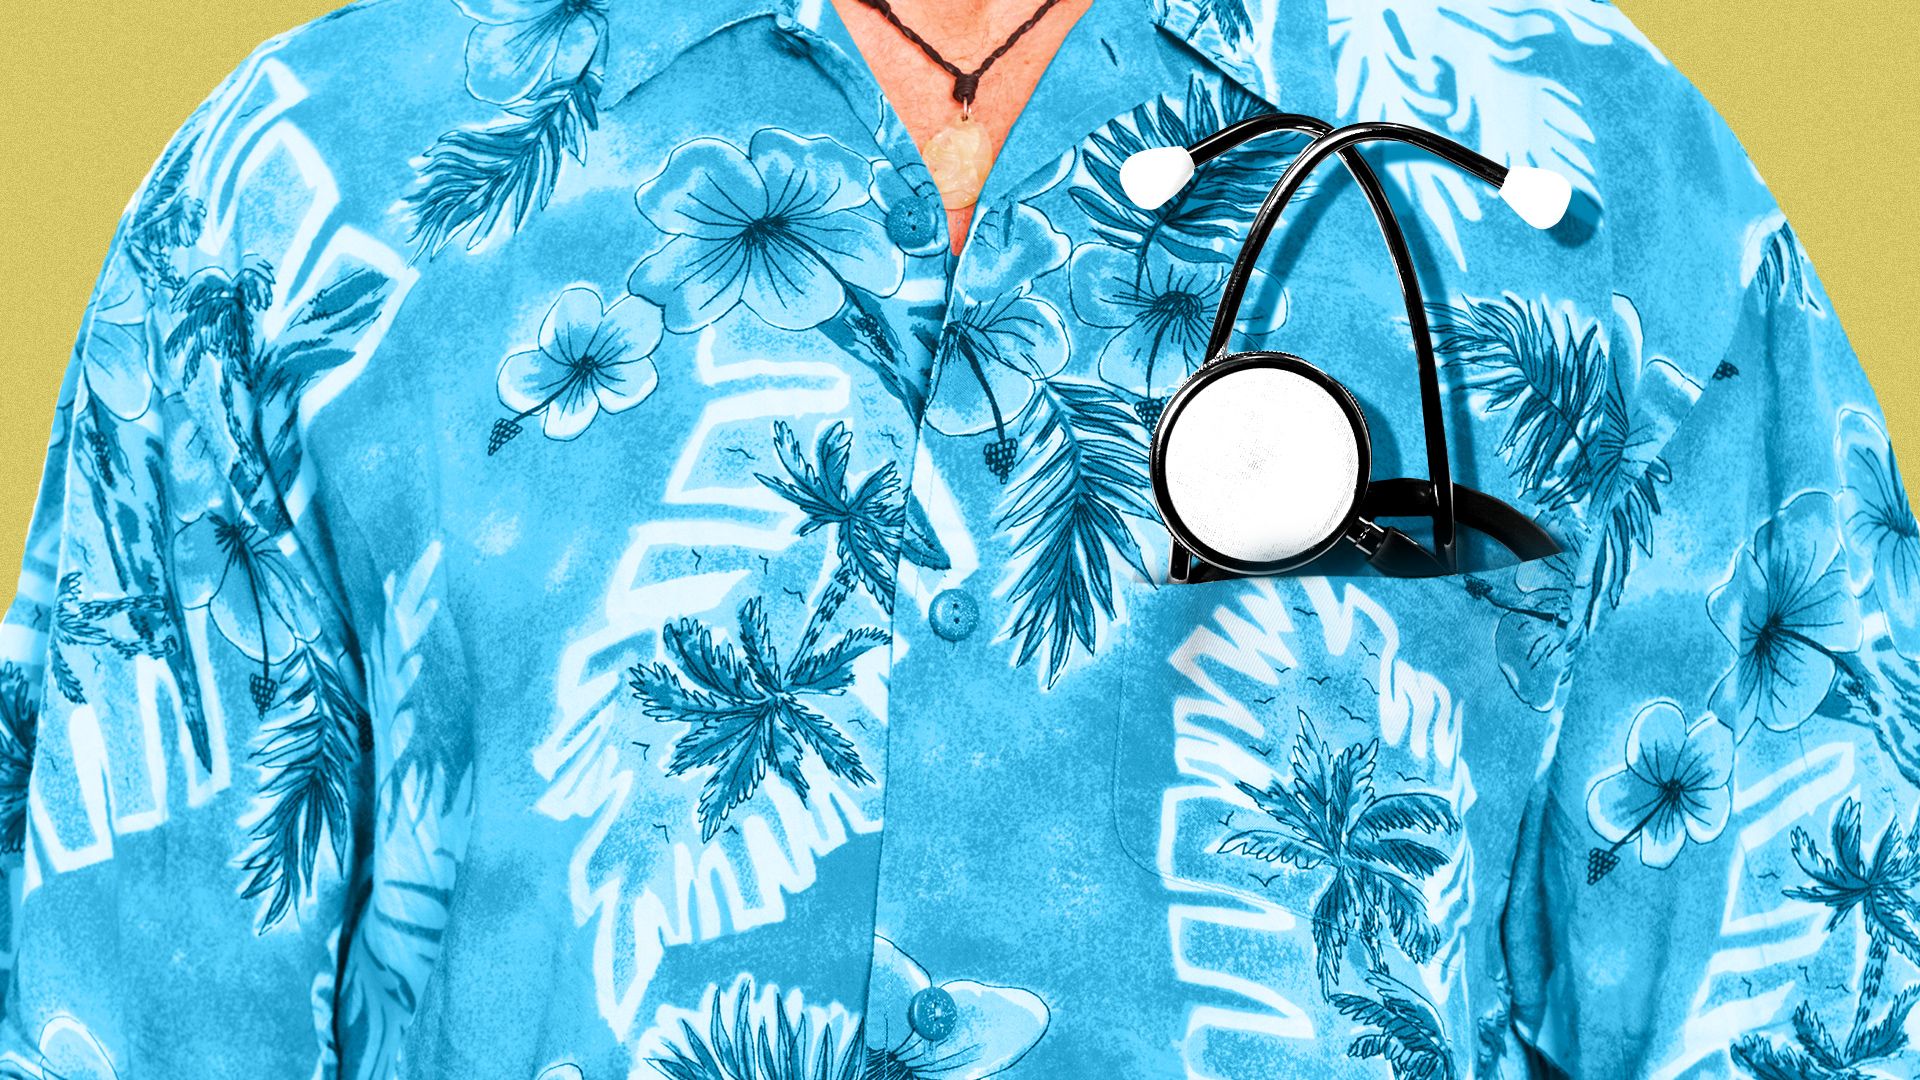 Illustration of a man in a Hawaiian shirt with a stethoscope in the chest pocket. 